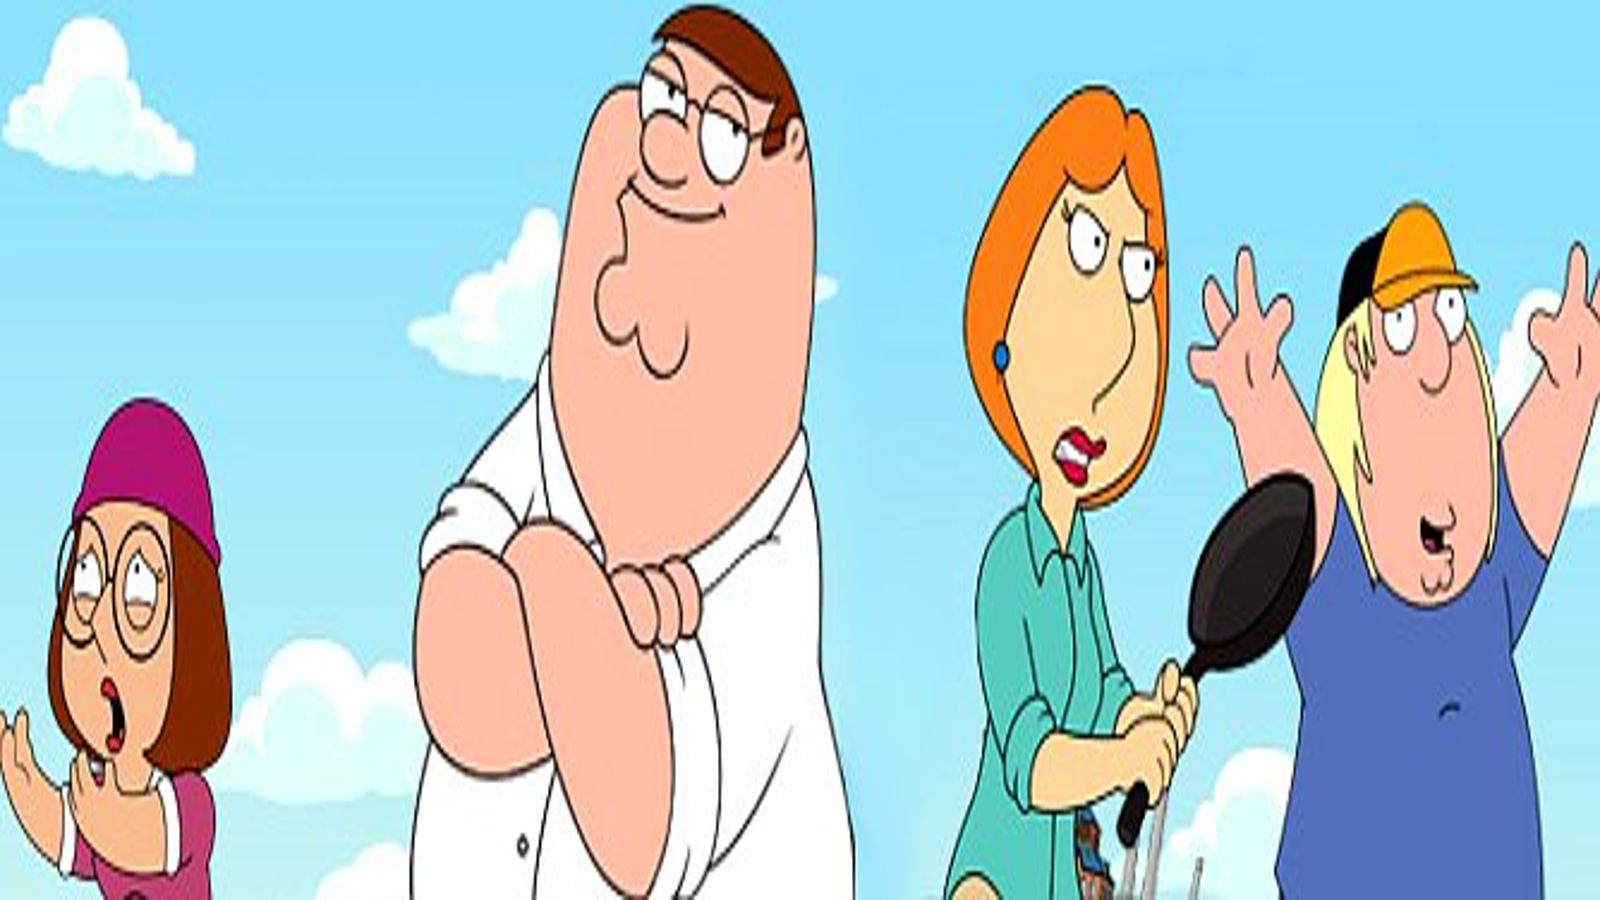 Family Guy Online Character Creator Available - IGN